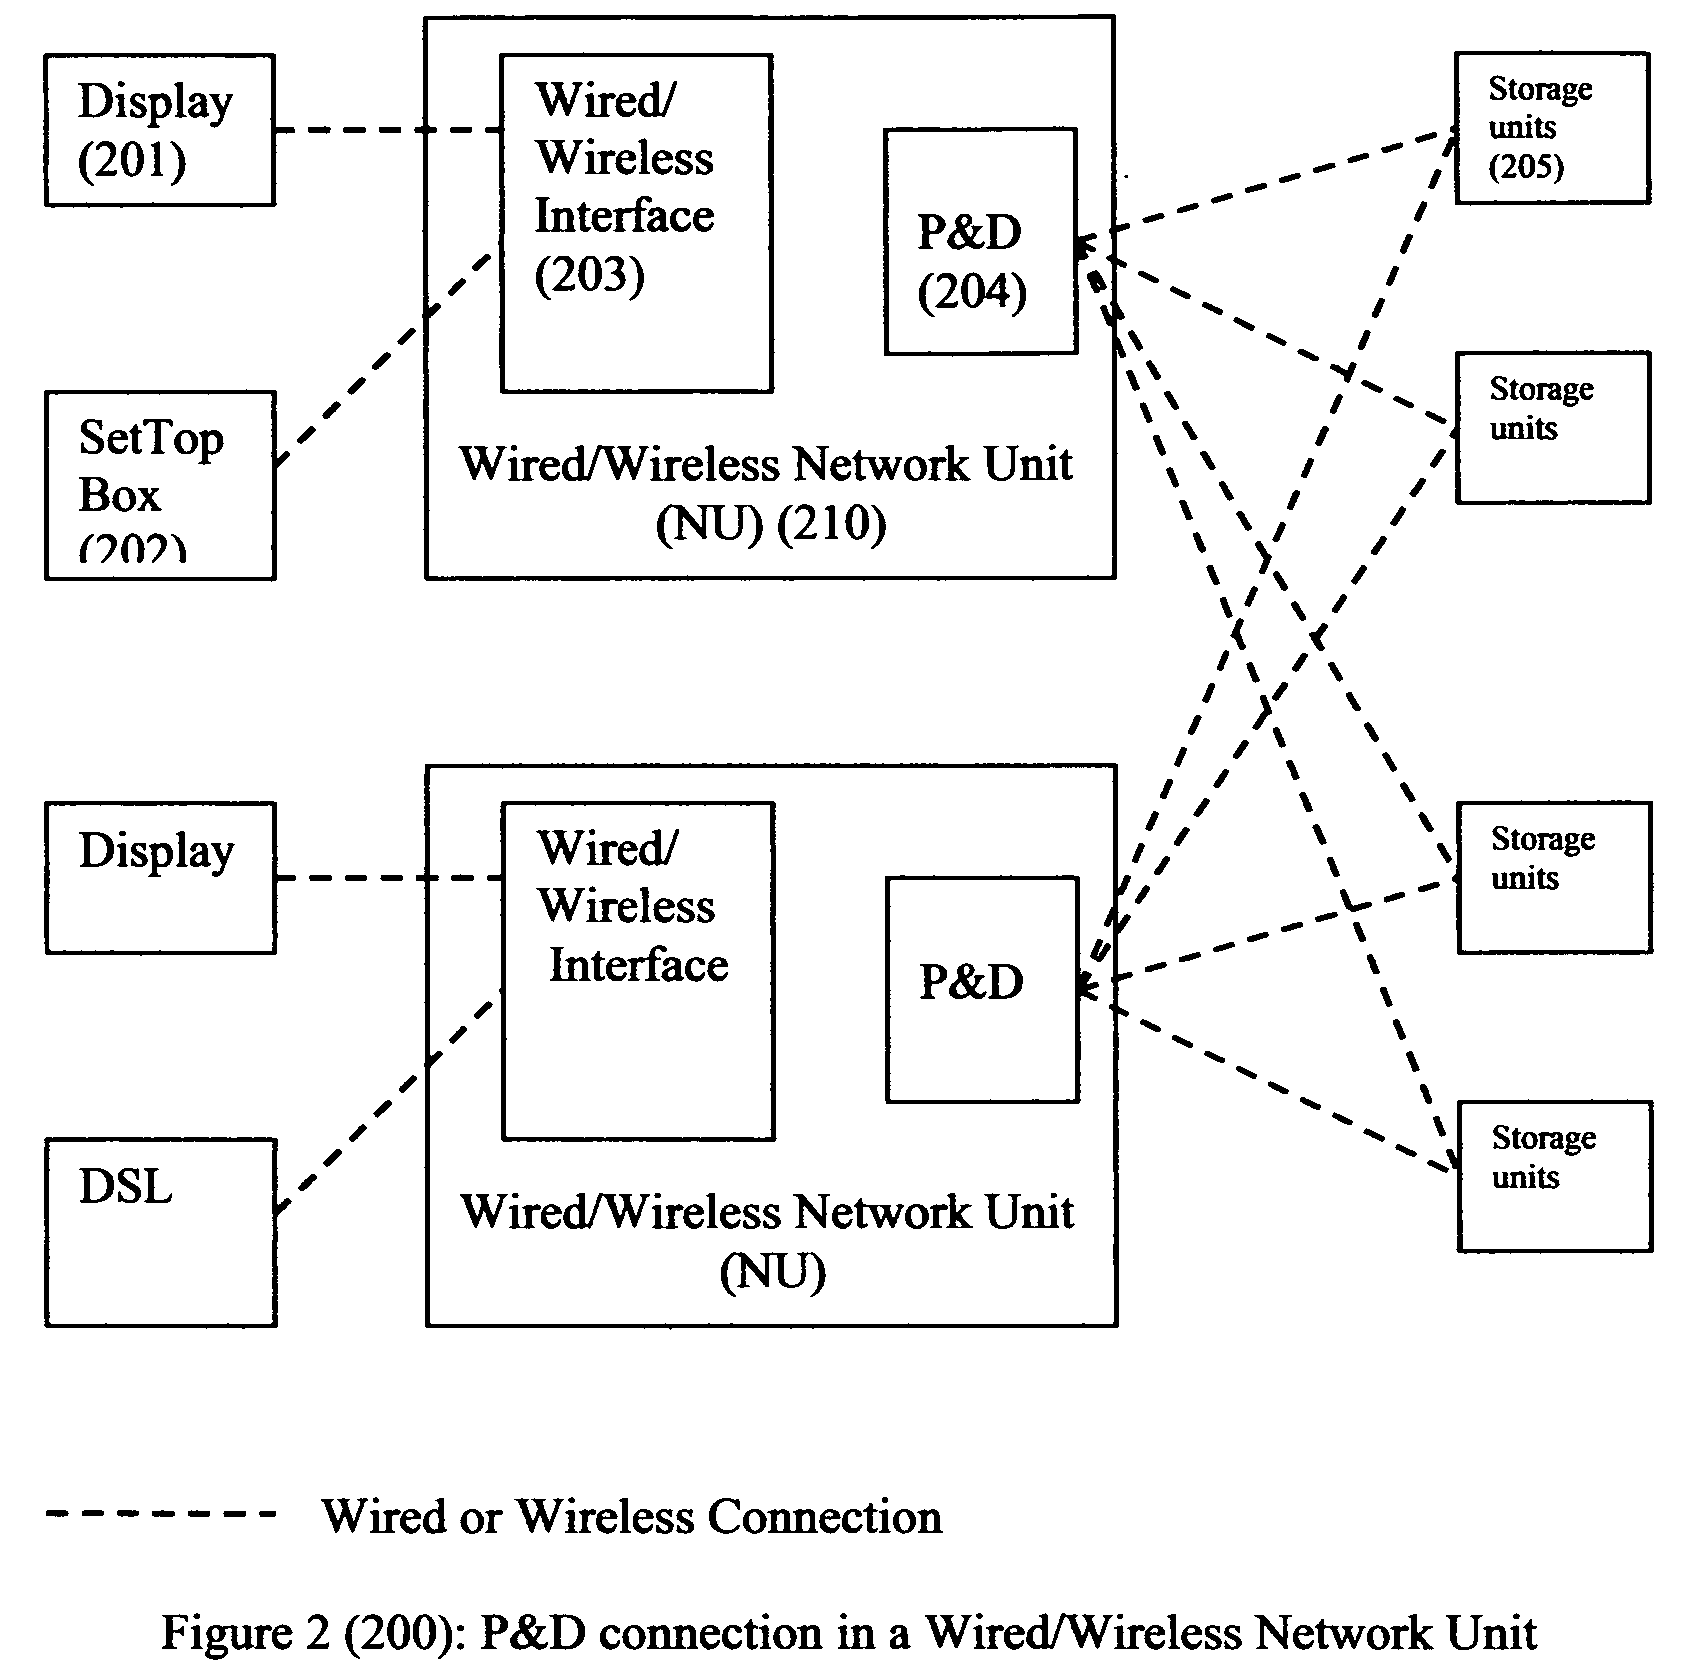 Method of maximizing the information access rate from/to storage units in wired/wireless networks